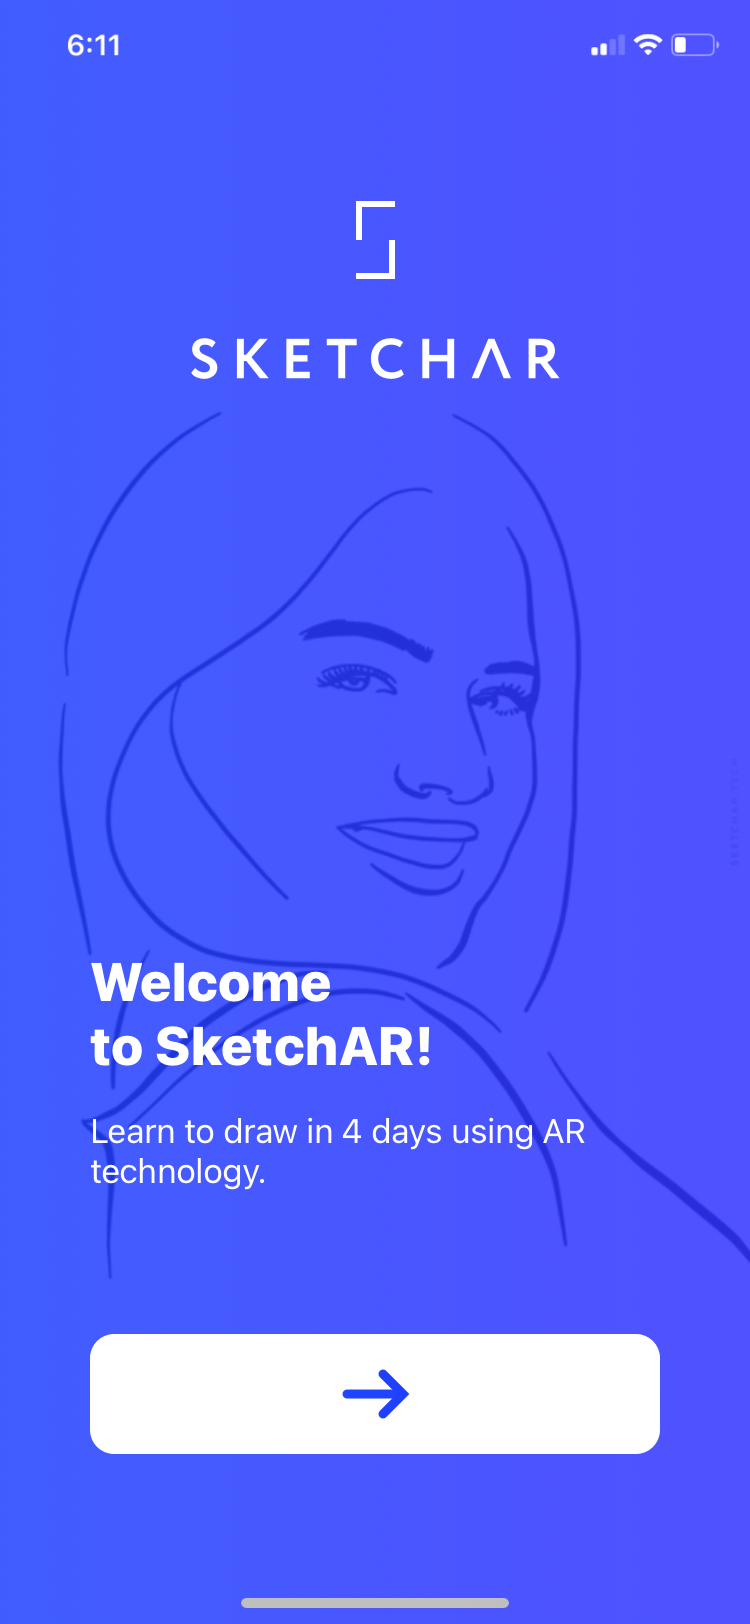 Sketch AR startup page.